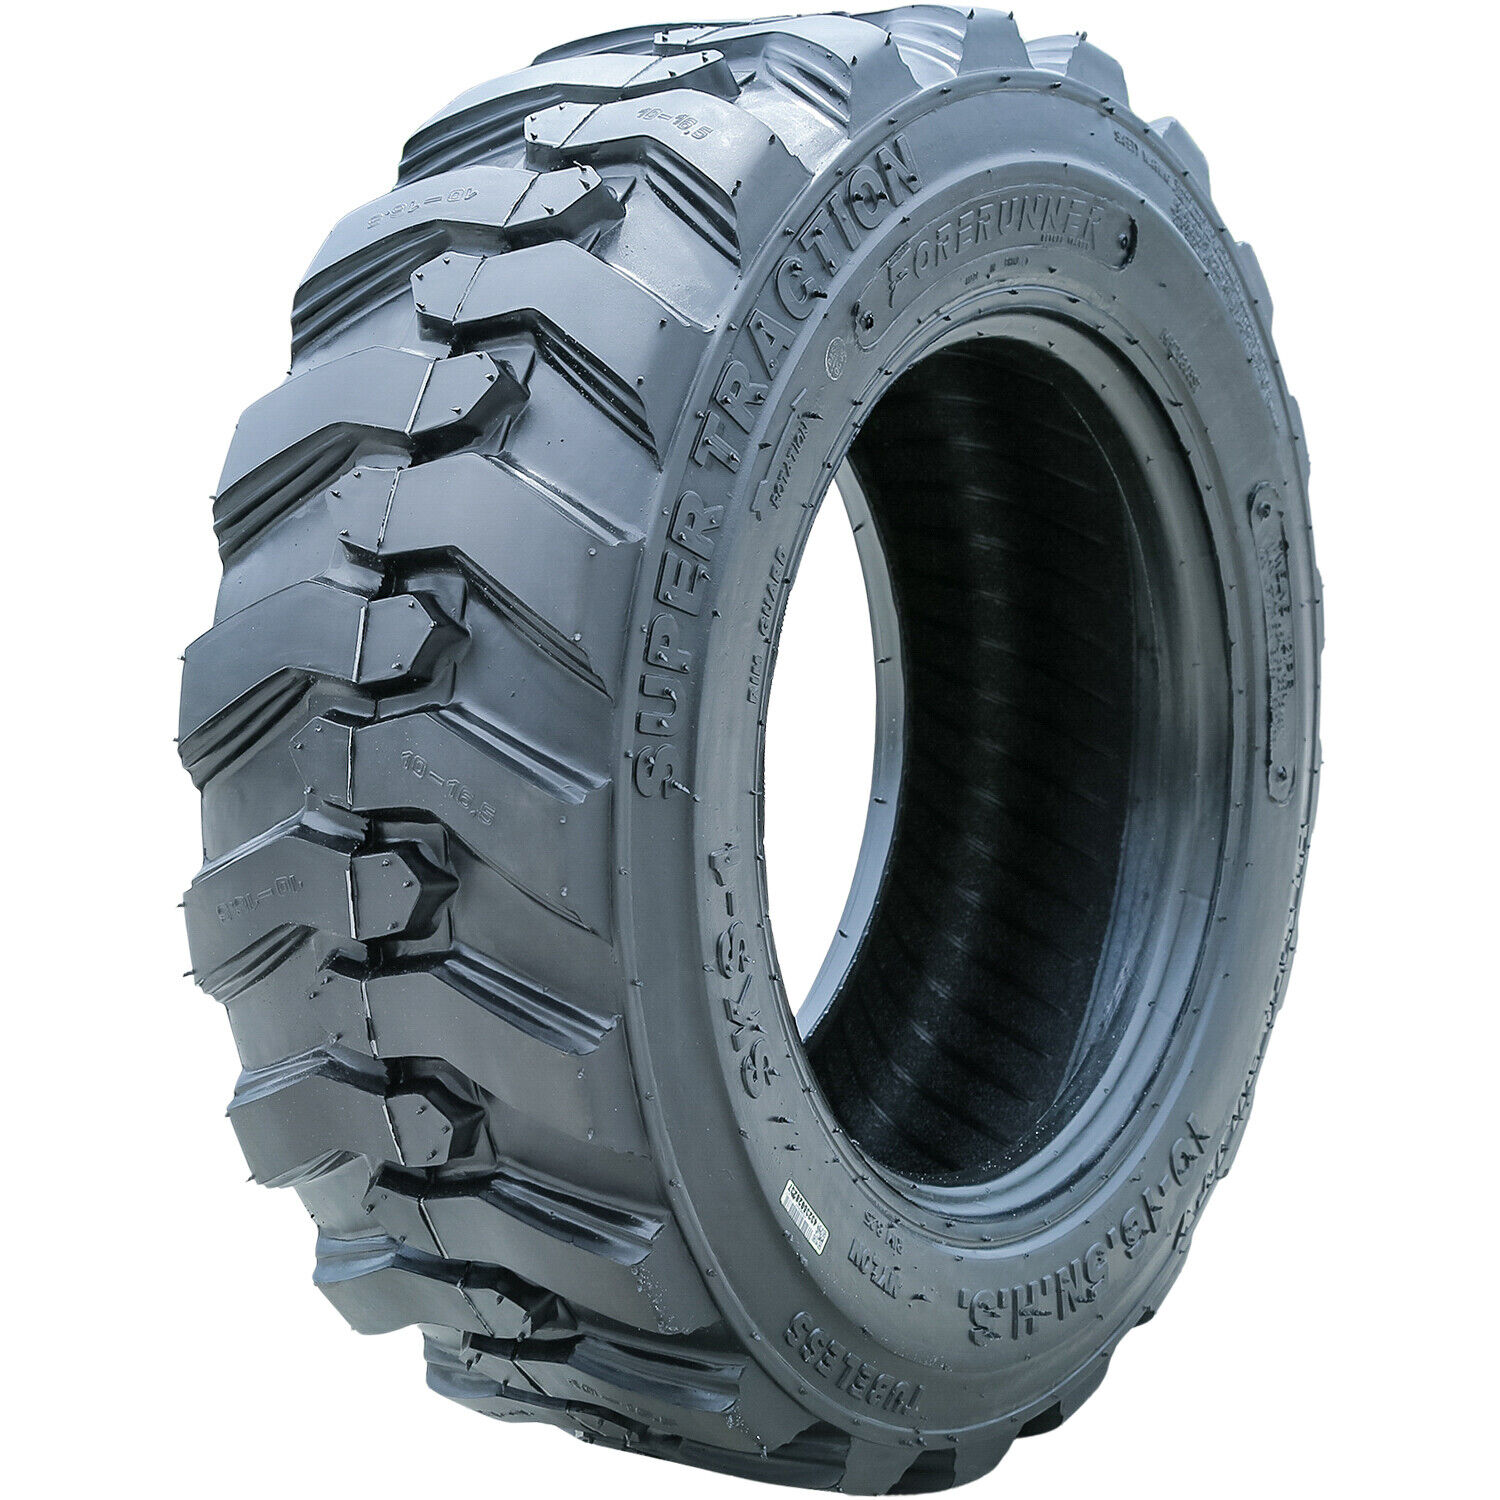 Tire Forerunner SKS-1 10-16.5 Load 12 Ply Industrial